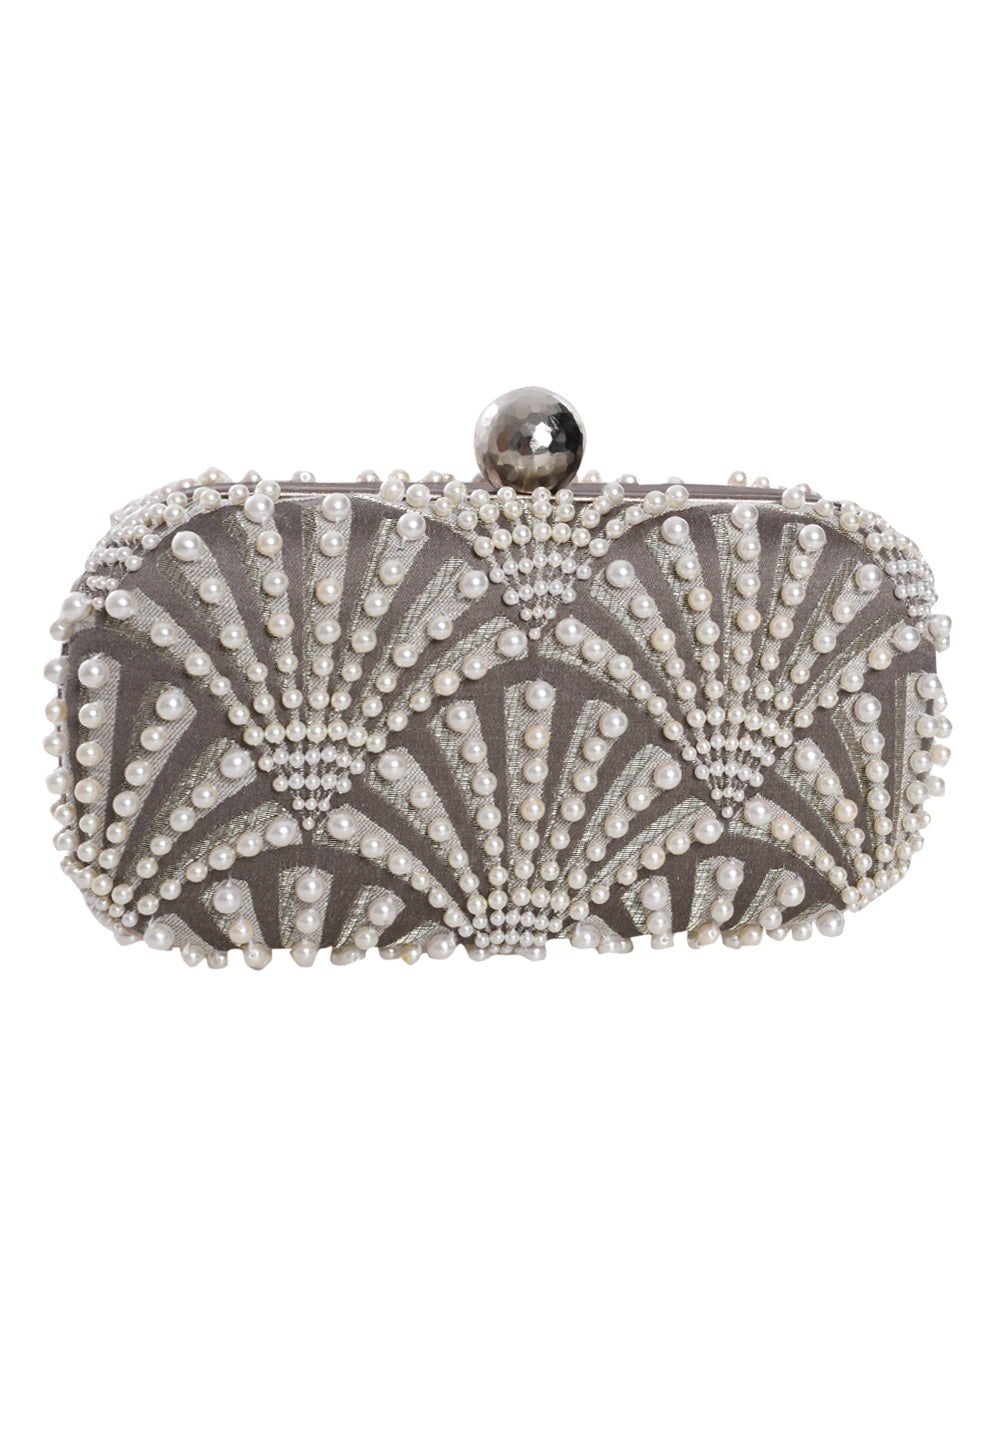 SCALLOPS SILVER EMBELLISHED PEARL BOX